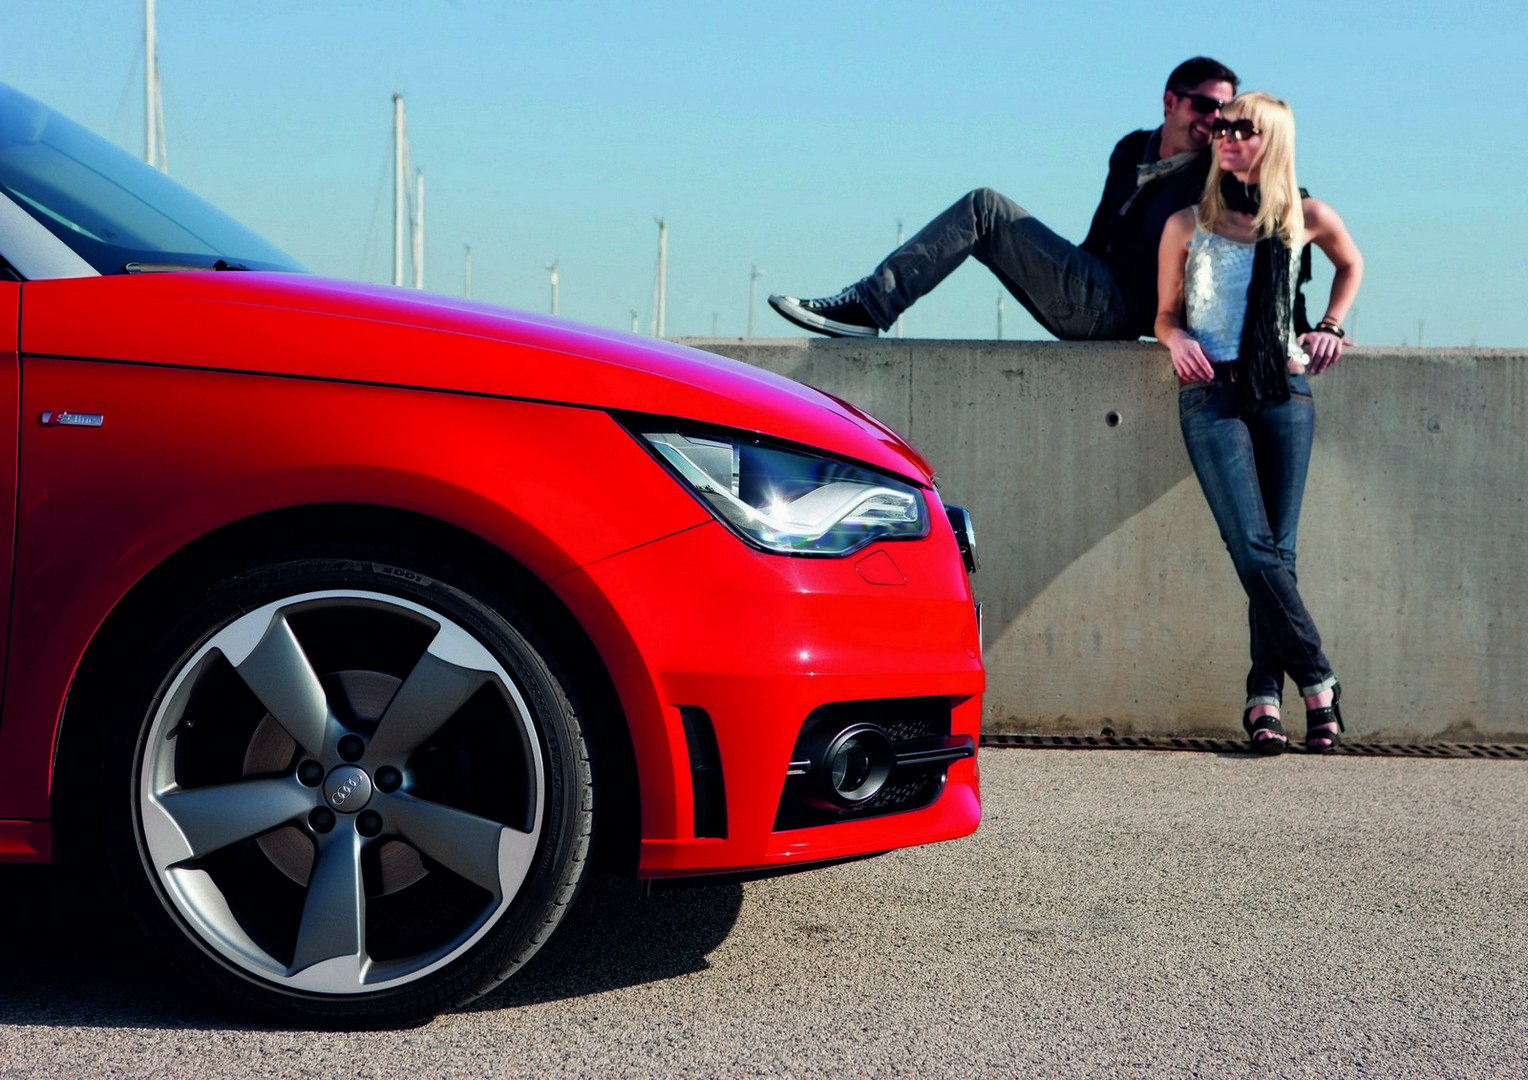 Audi A1 Wallpapers for Computer Desktop, Android, IOS, Iphone ...